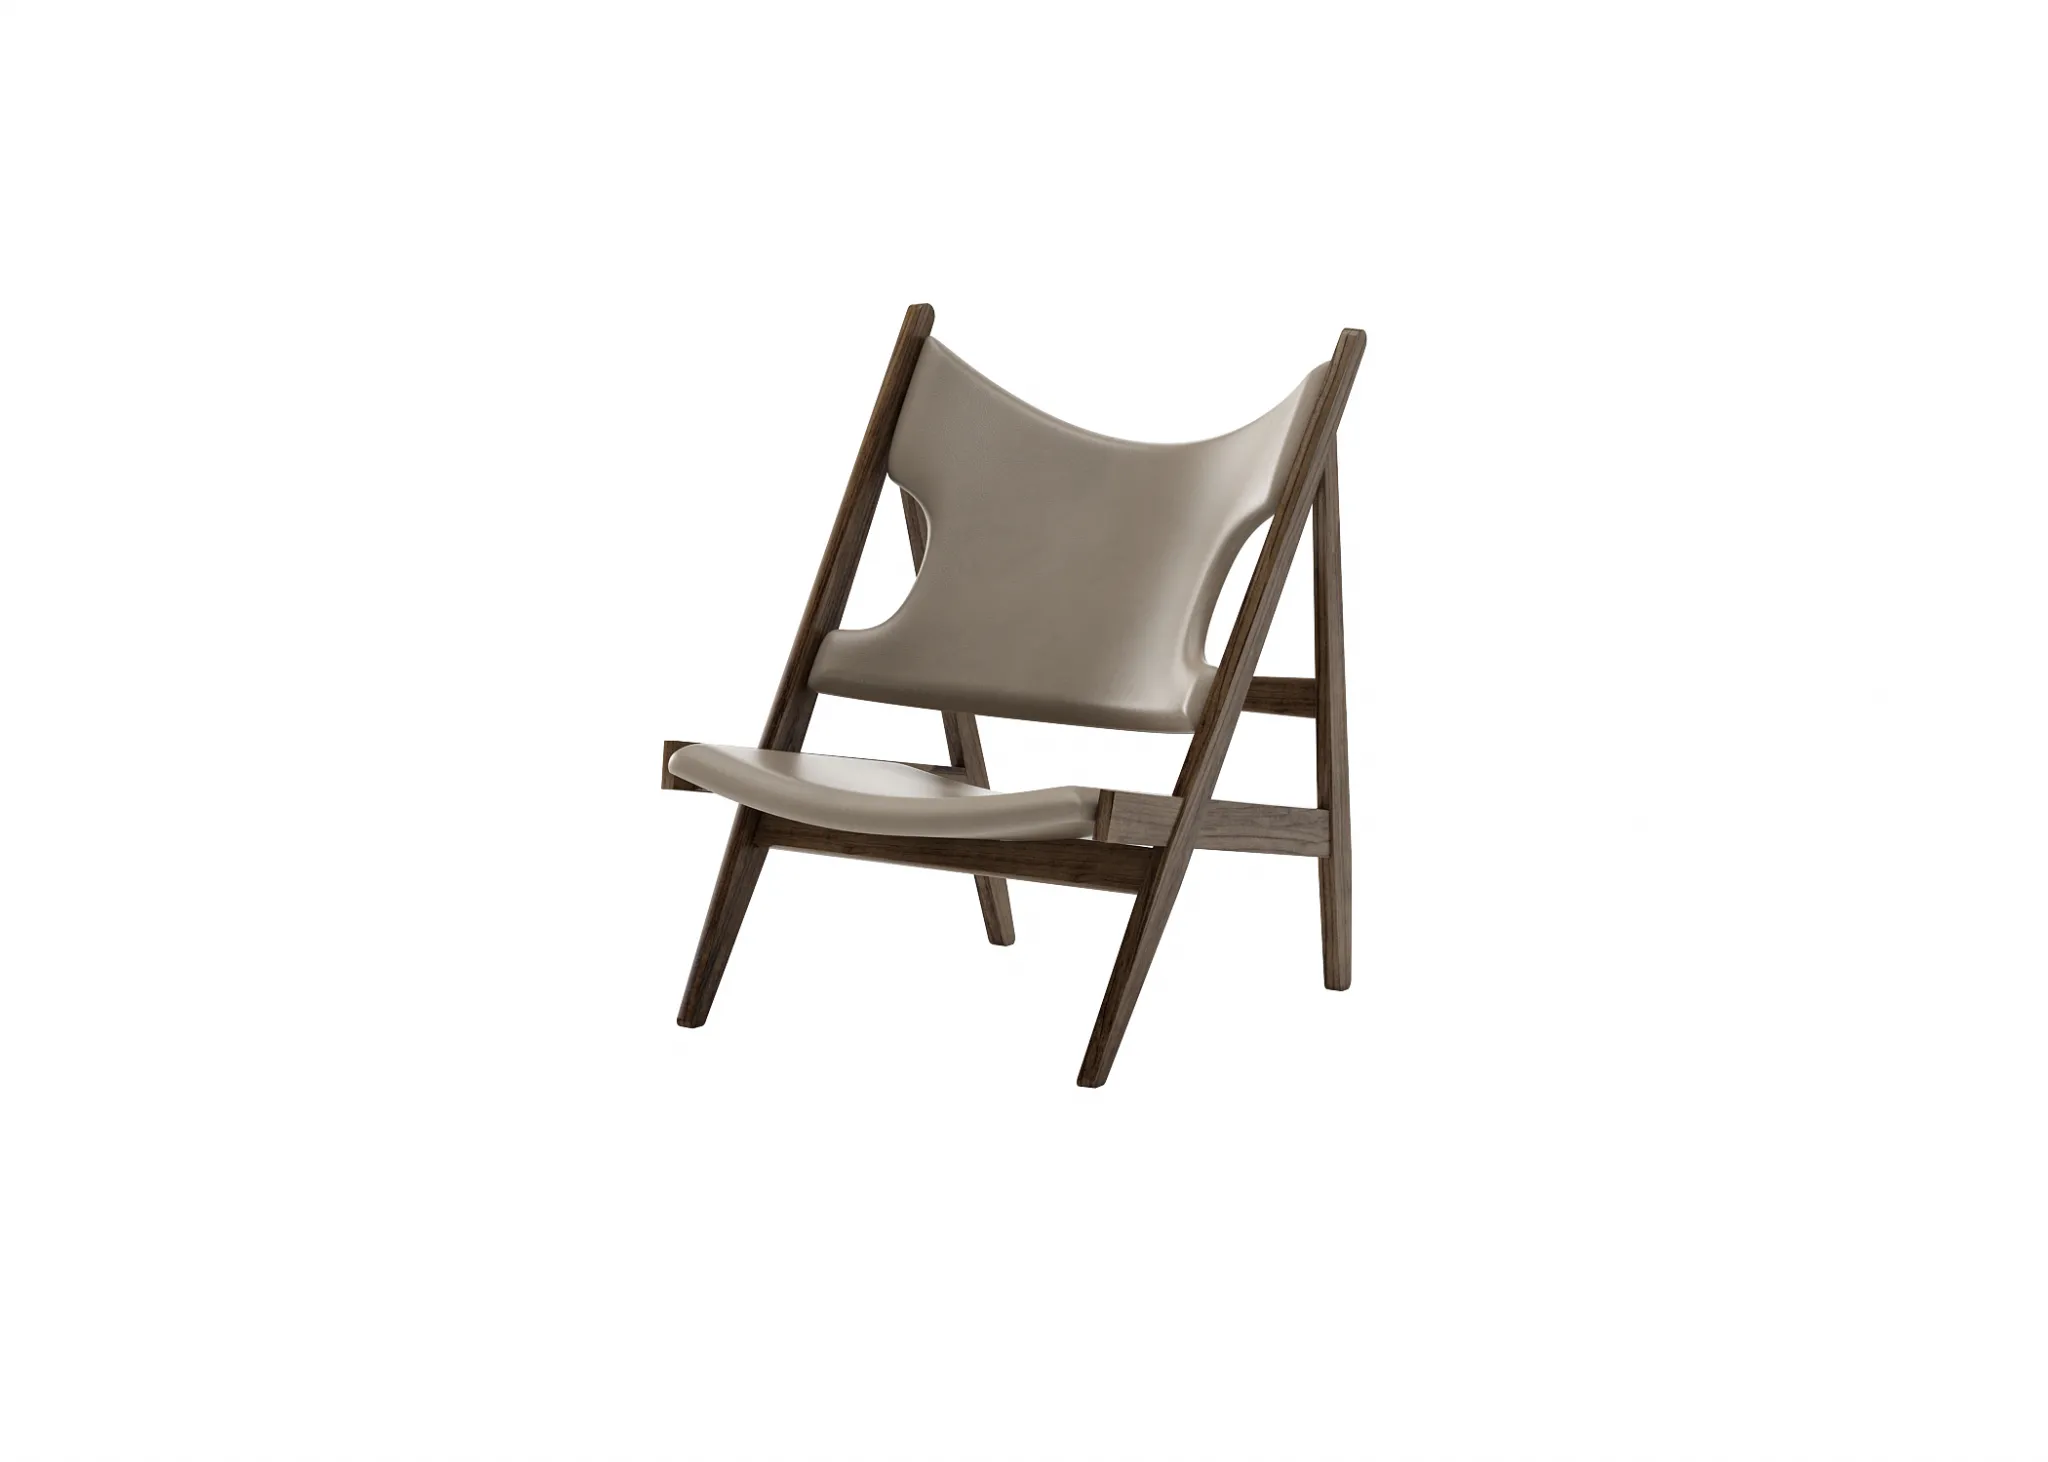 FURNITURE 3D MODELS – CHAIRS – 0300